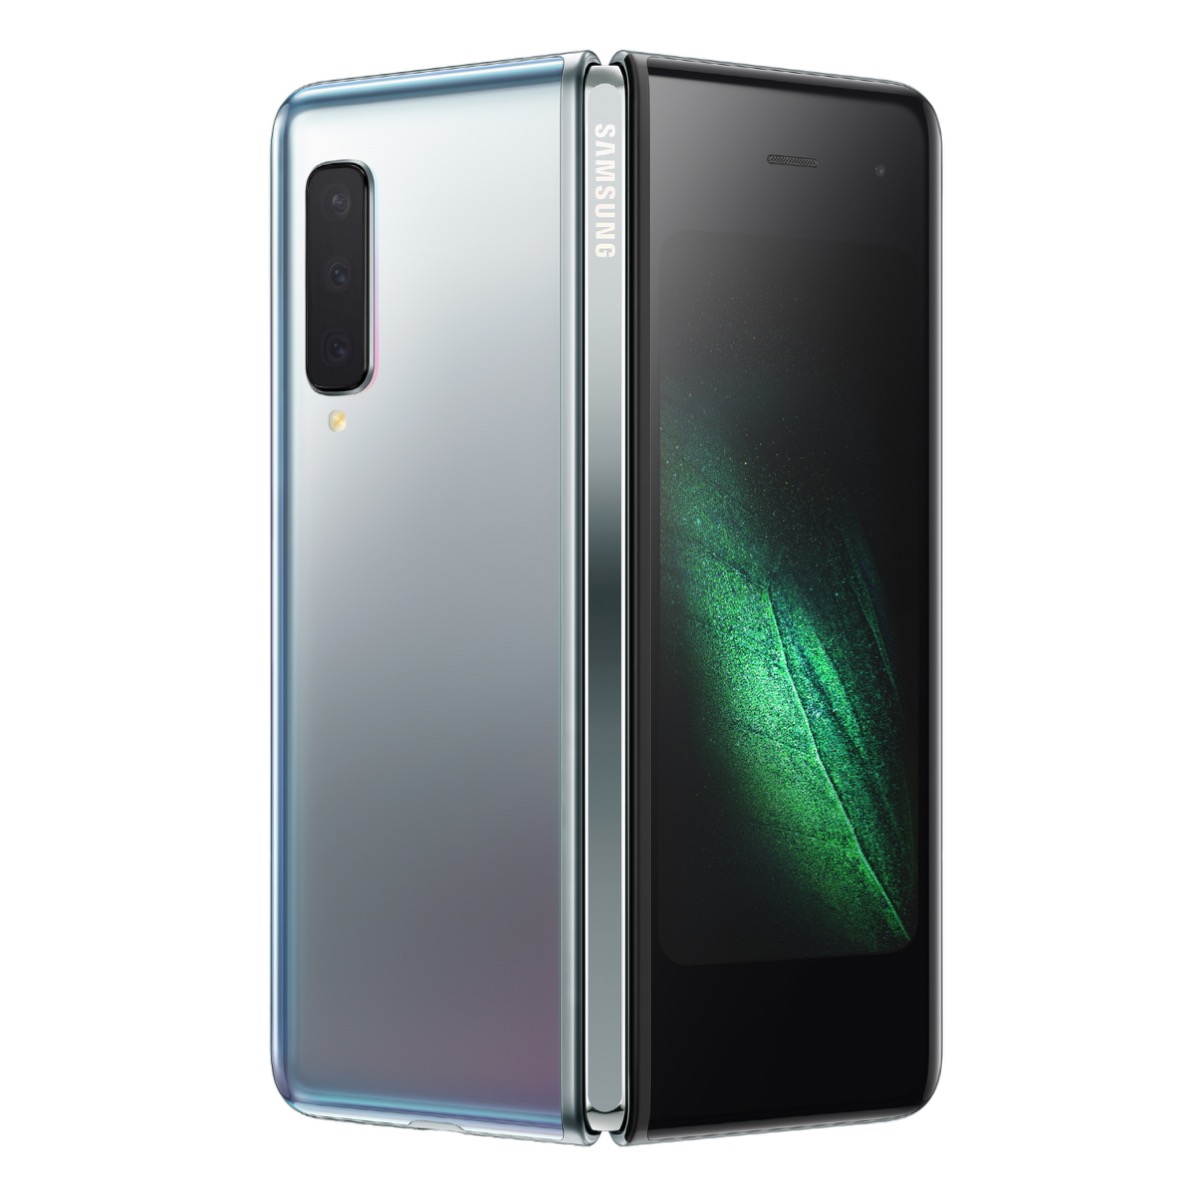 Sell Galaxy Fold in Singapore